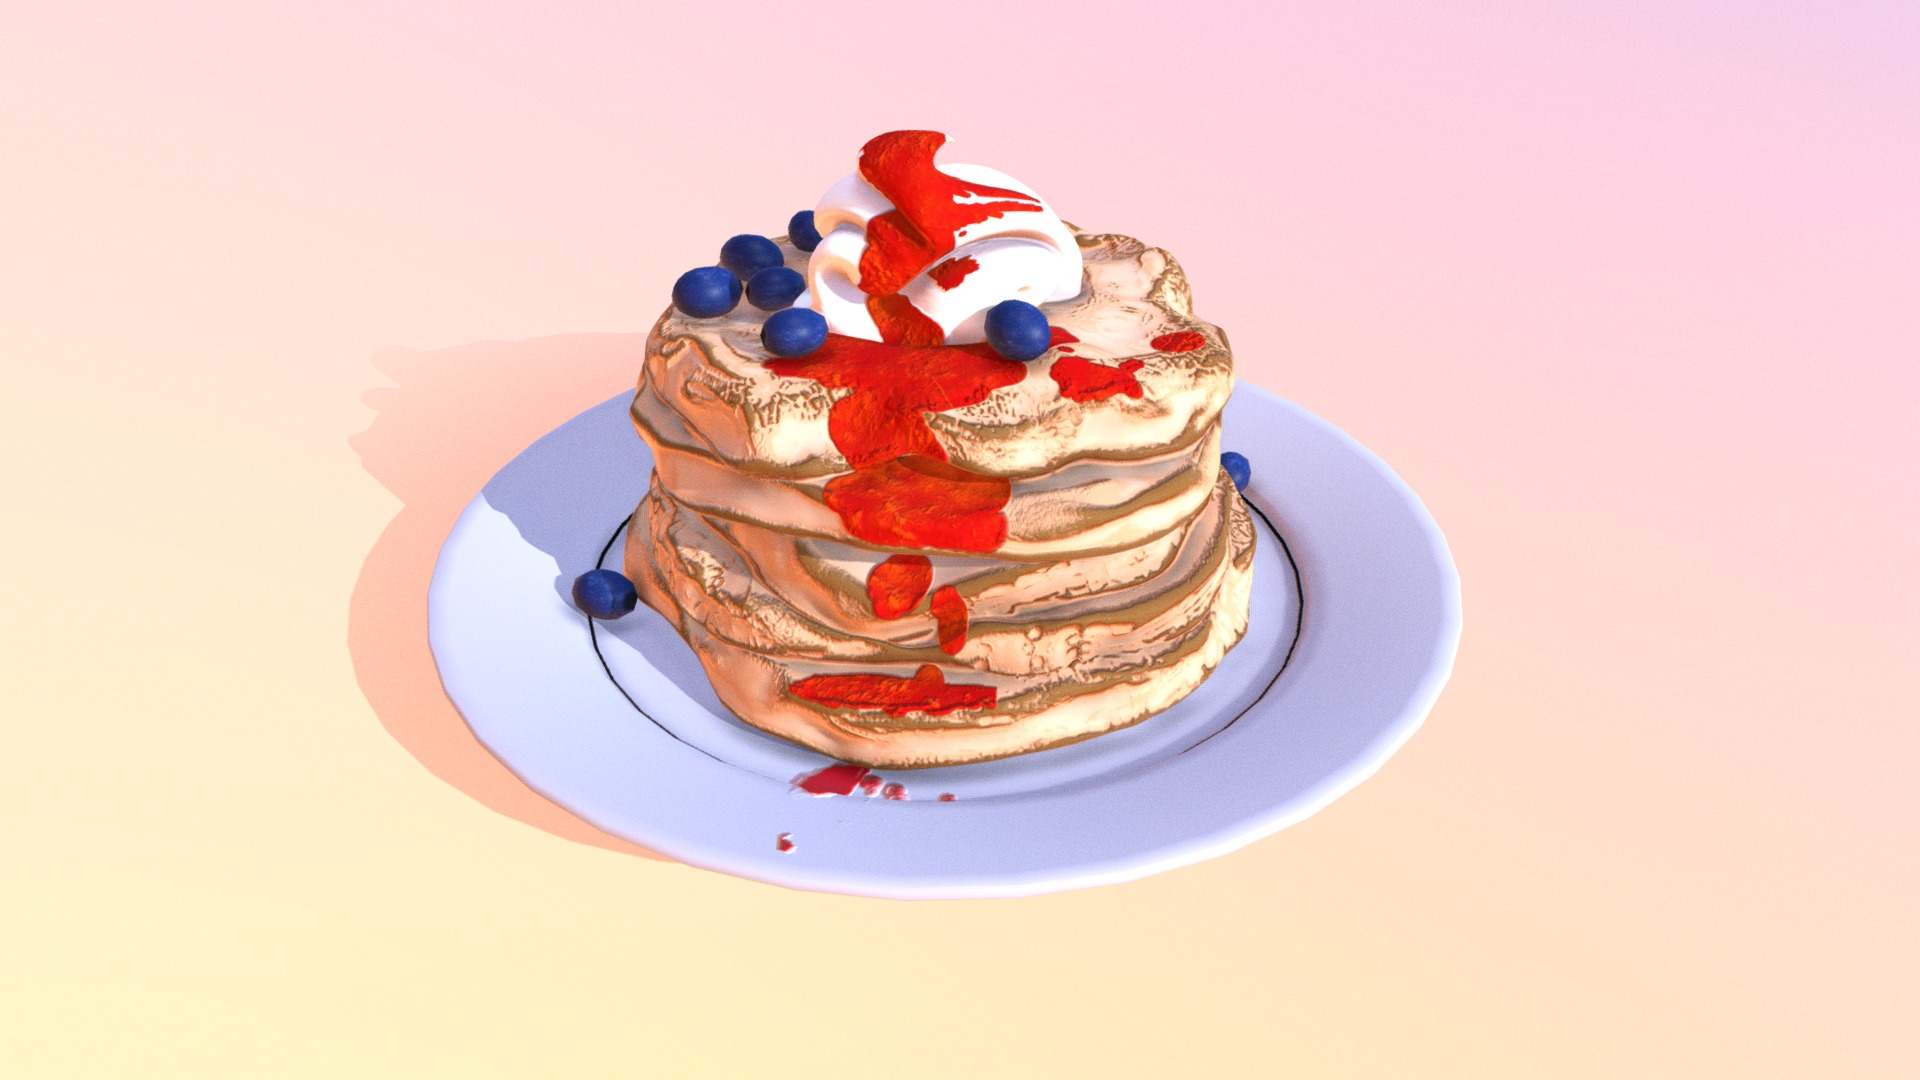 3D model Pancakes - This is a 3D model of the Pancakes. The 3D model is about a stack of pancakes with blueberries on top.